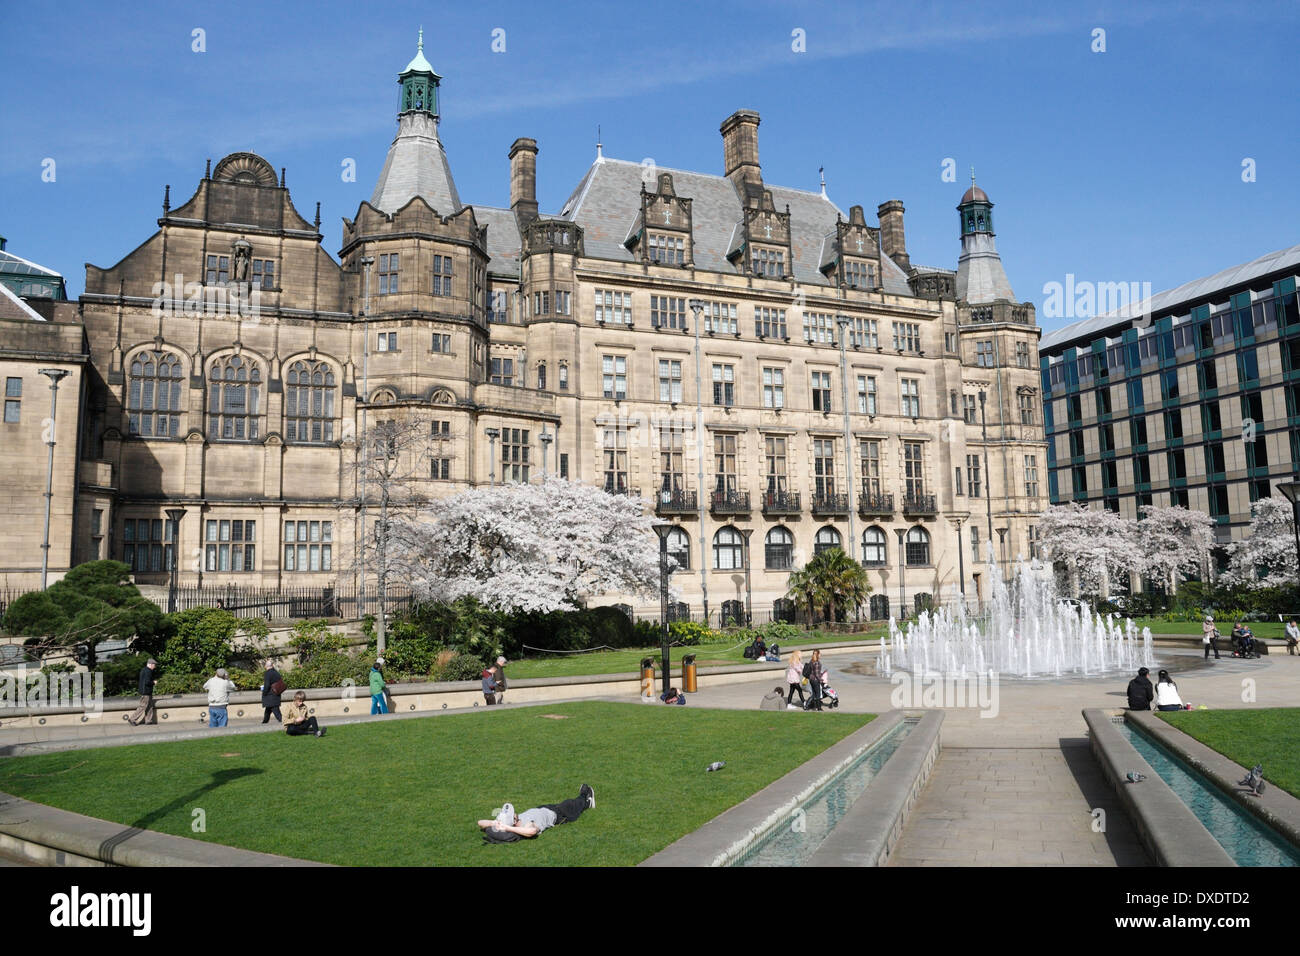 Sheffield Town Hall and the Peace Gardens a public space, Sheffield city centre England UK. Grade 1 listed building Victorian architecture Stock Photo